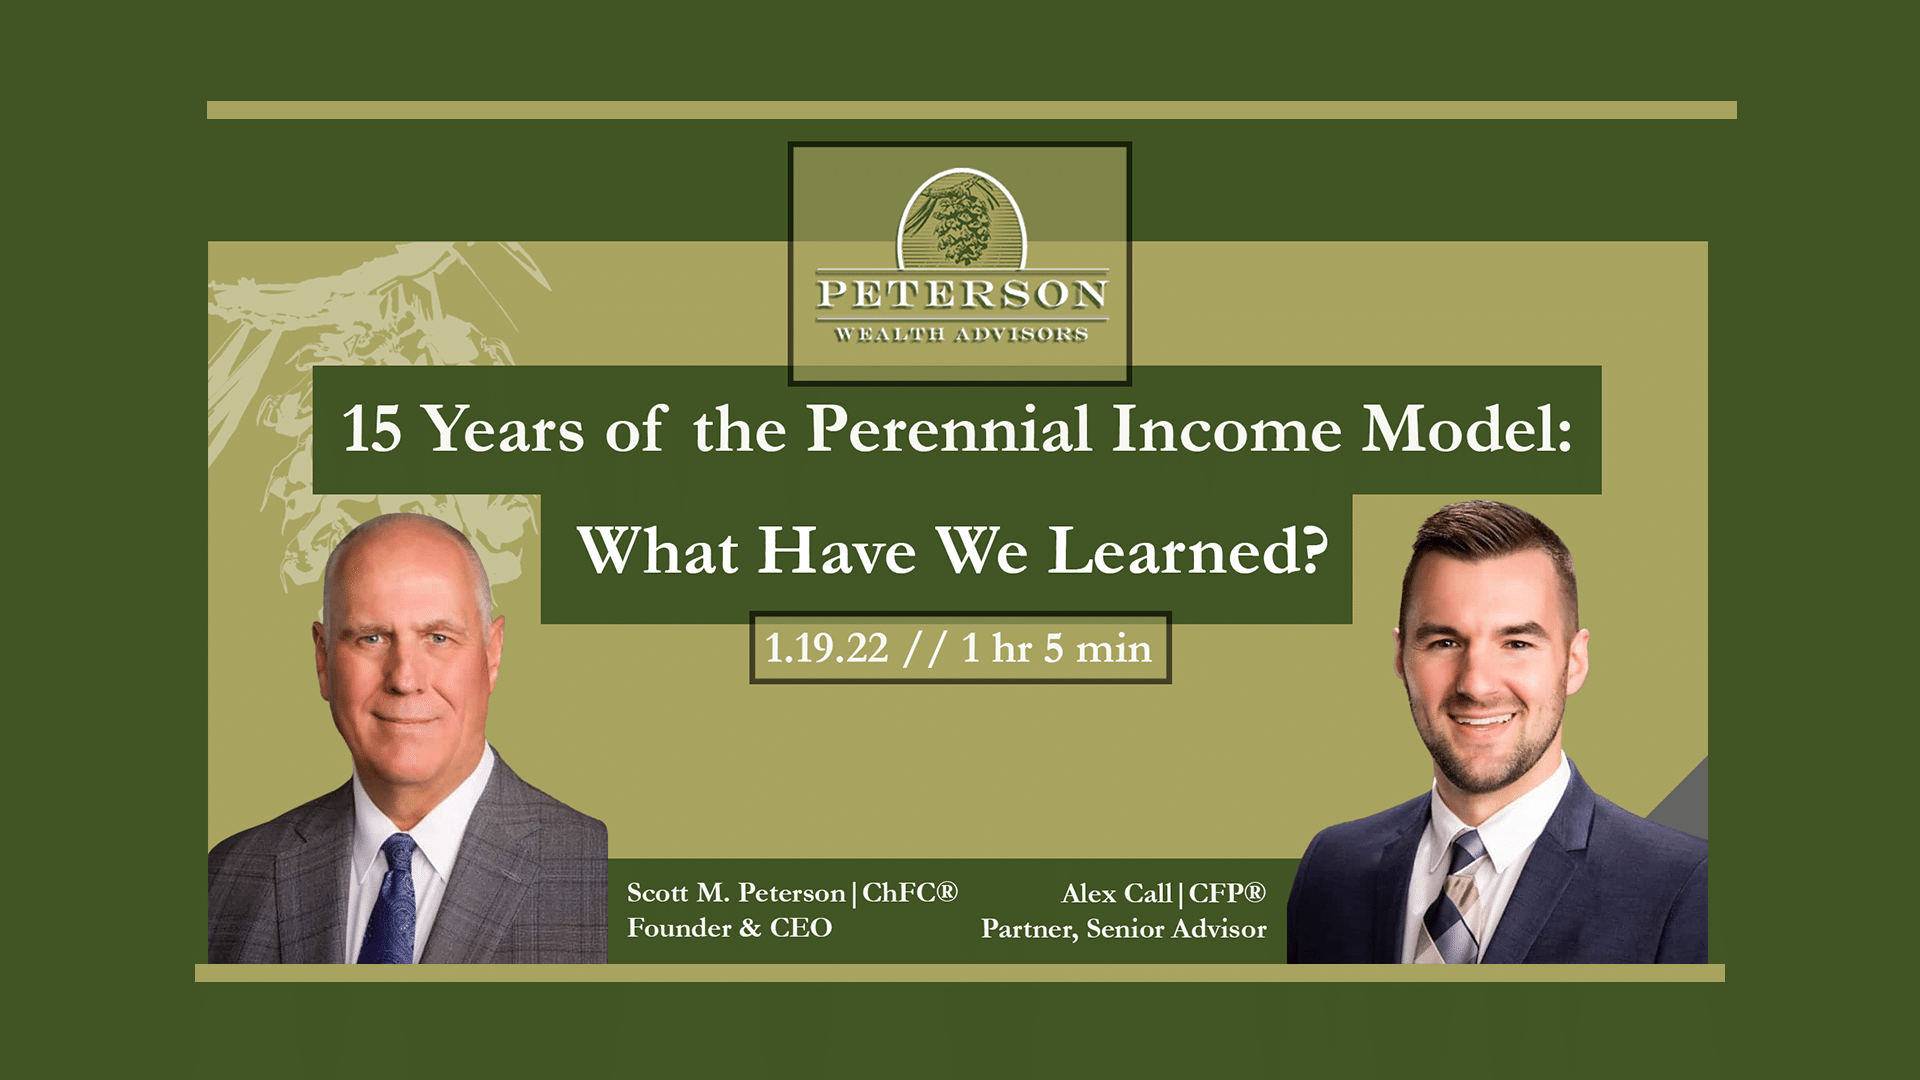 15 Years of the Perennial Income Model: What Have We Learned?